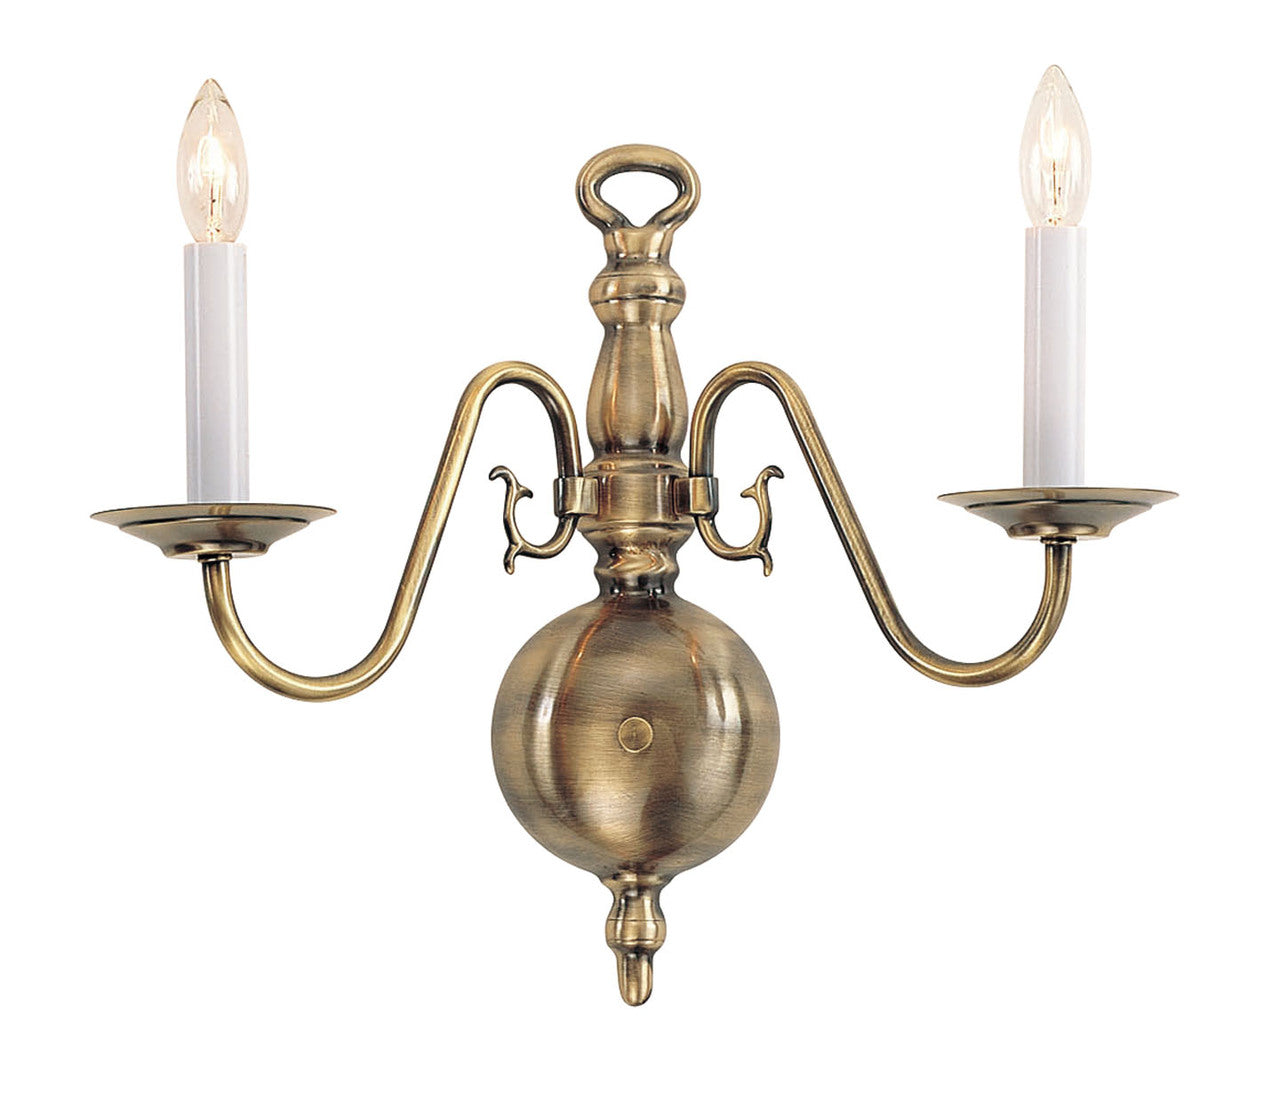 LIVEX Lighting 5002-01 Williamsburgh Wall Sconce in Antique Brass (2 Light)